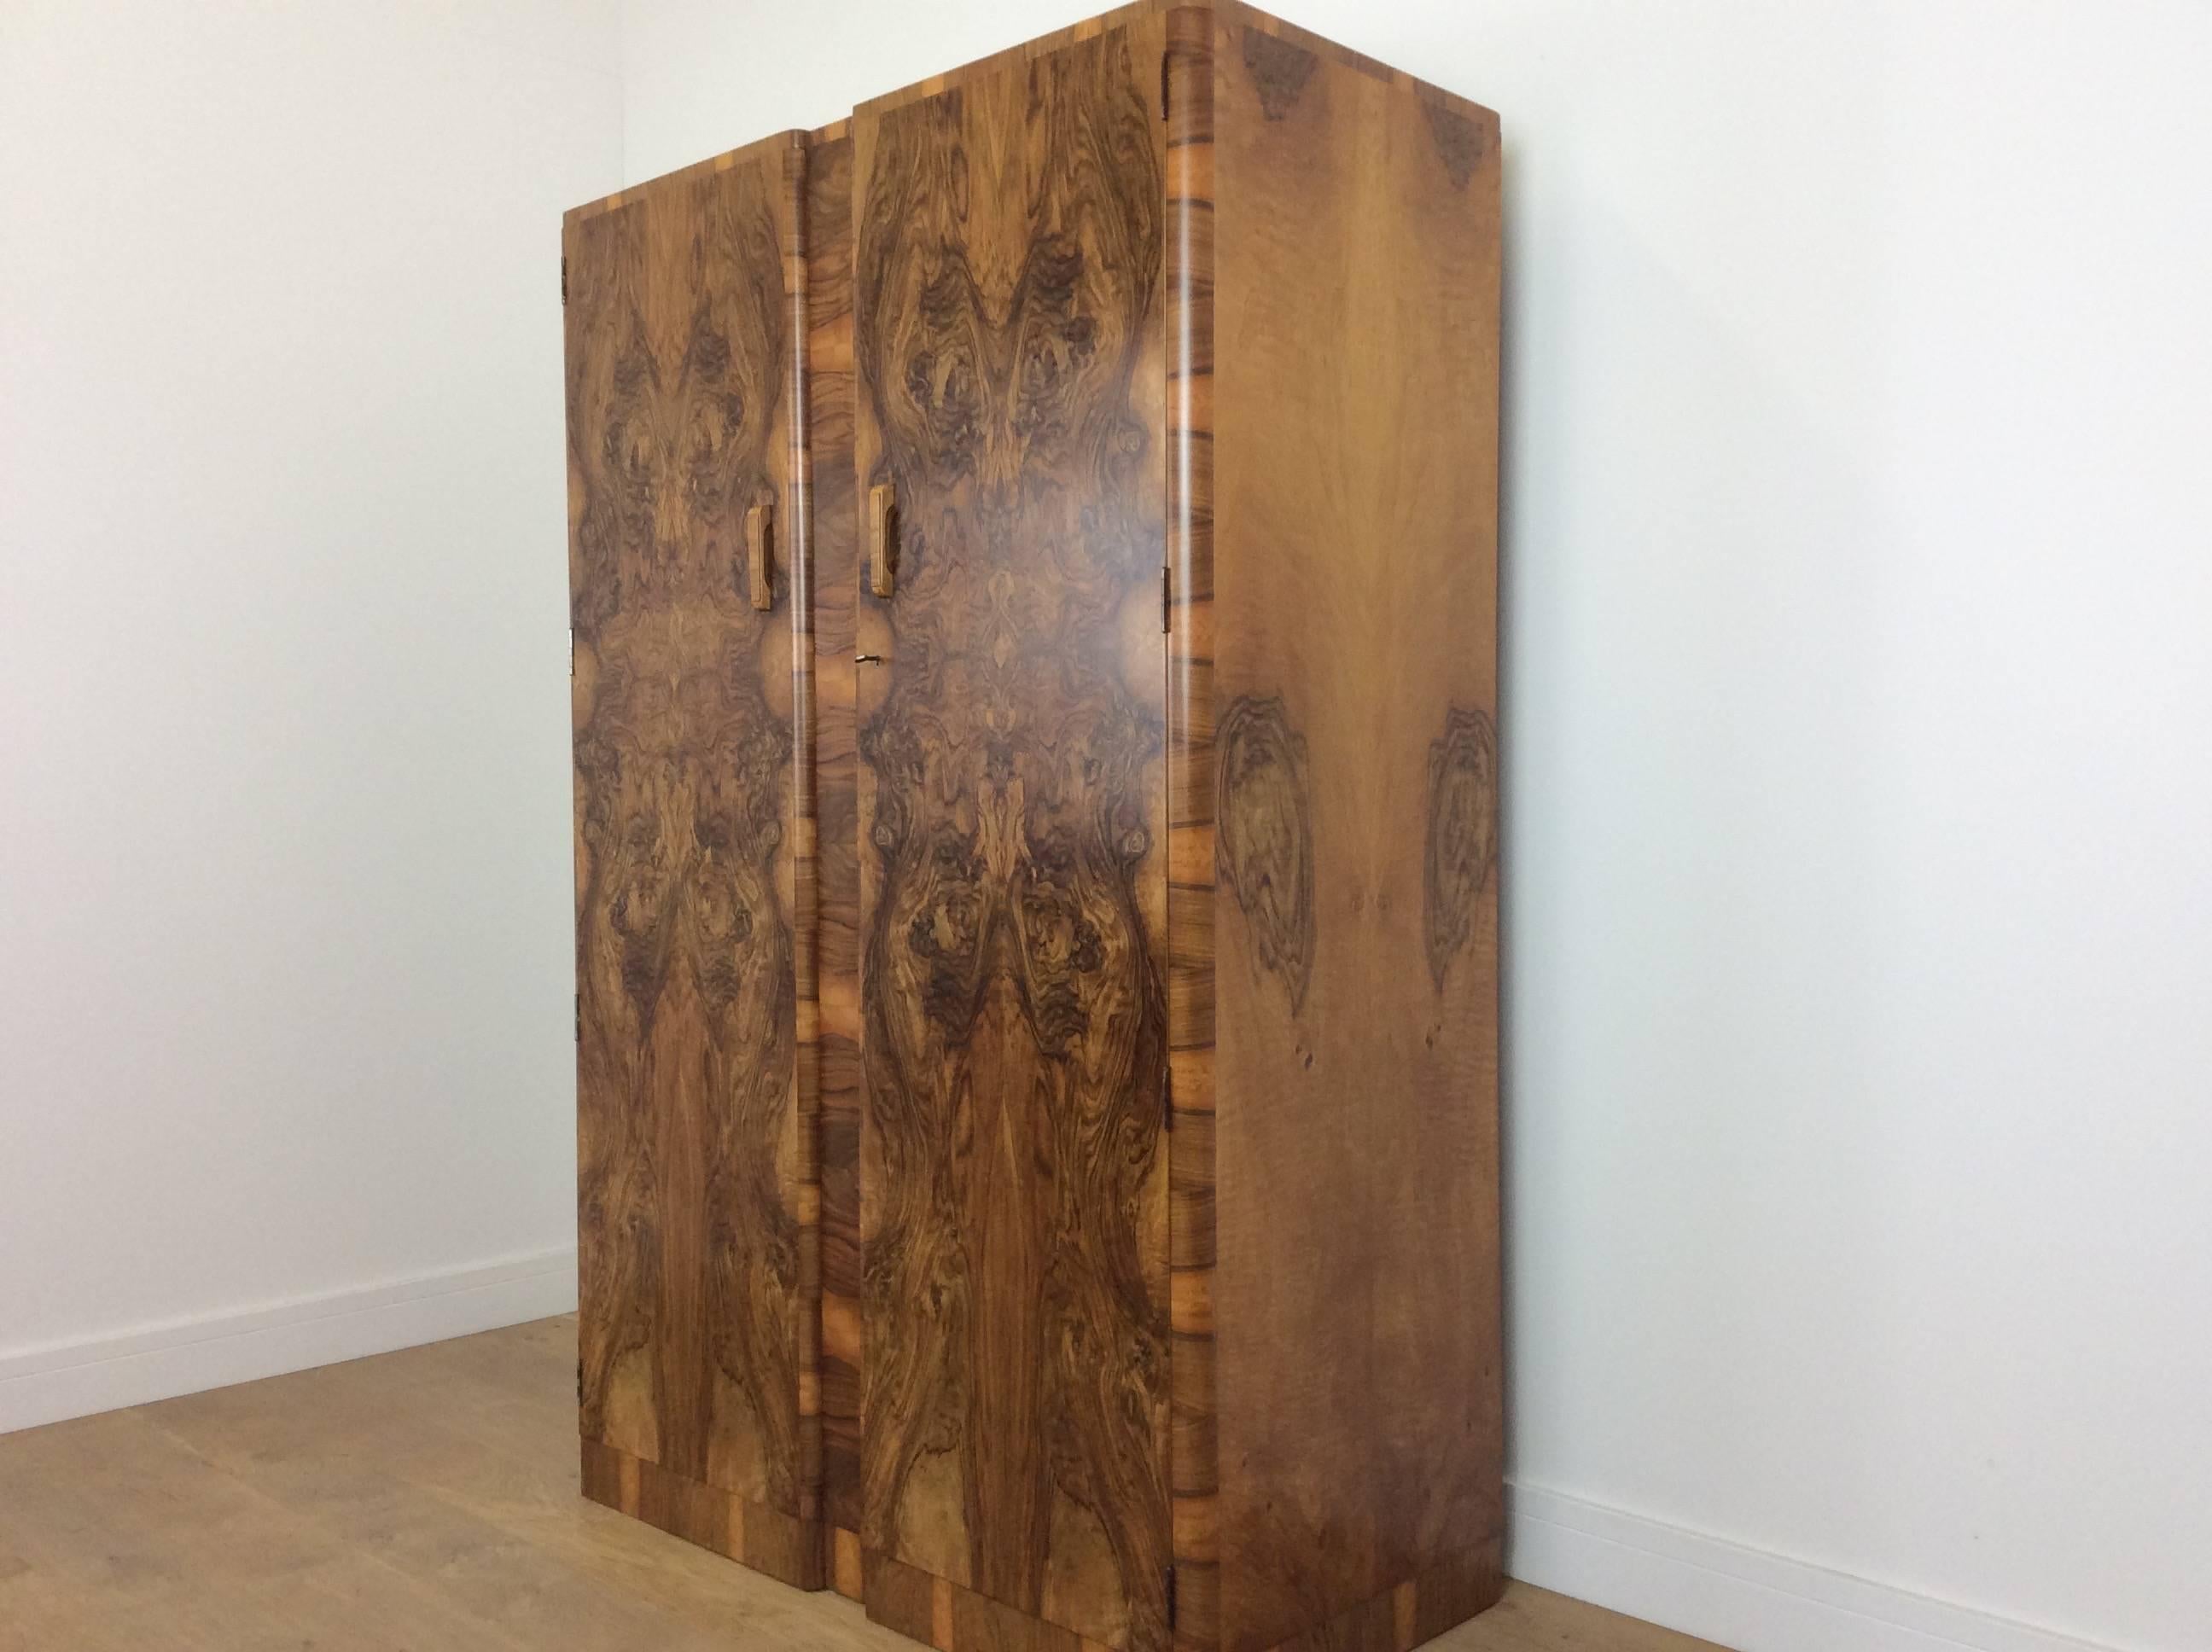 Art Deco wardrobe with the most stunning figured walnut.
This really is the most stunning Art Deco wardrobe, beautiful figured walnut veneer nice curved ends.
Measures: 185 cm H, 122 cm W, 59 cm D.
British, circa 1930.